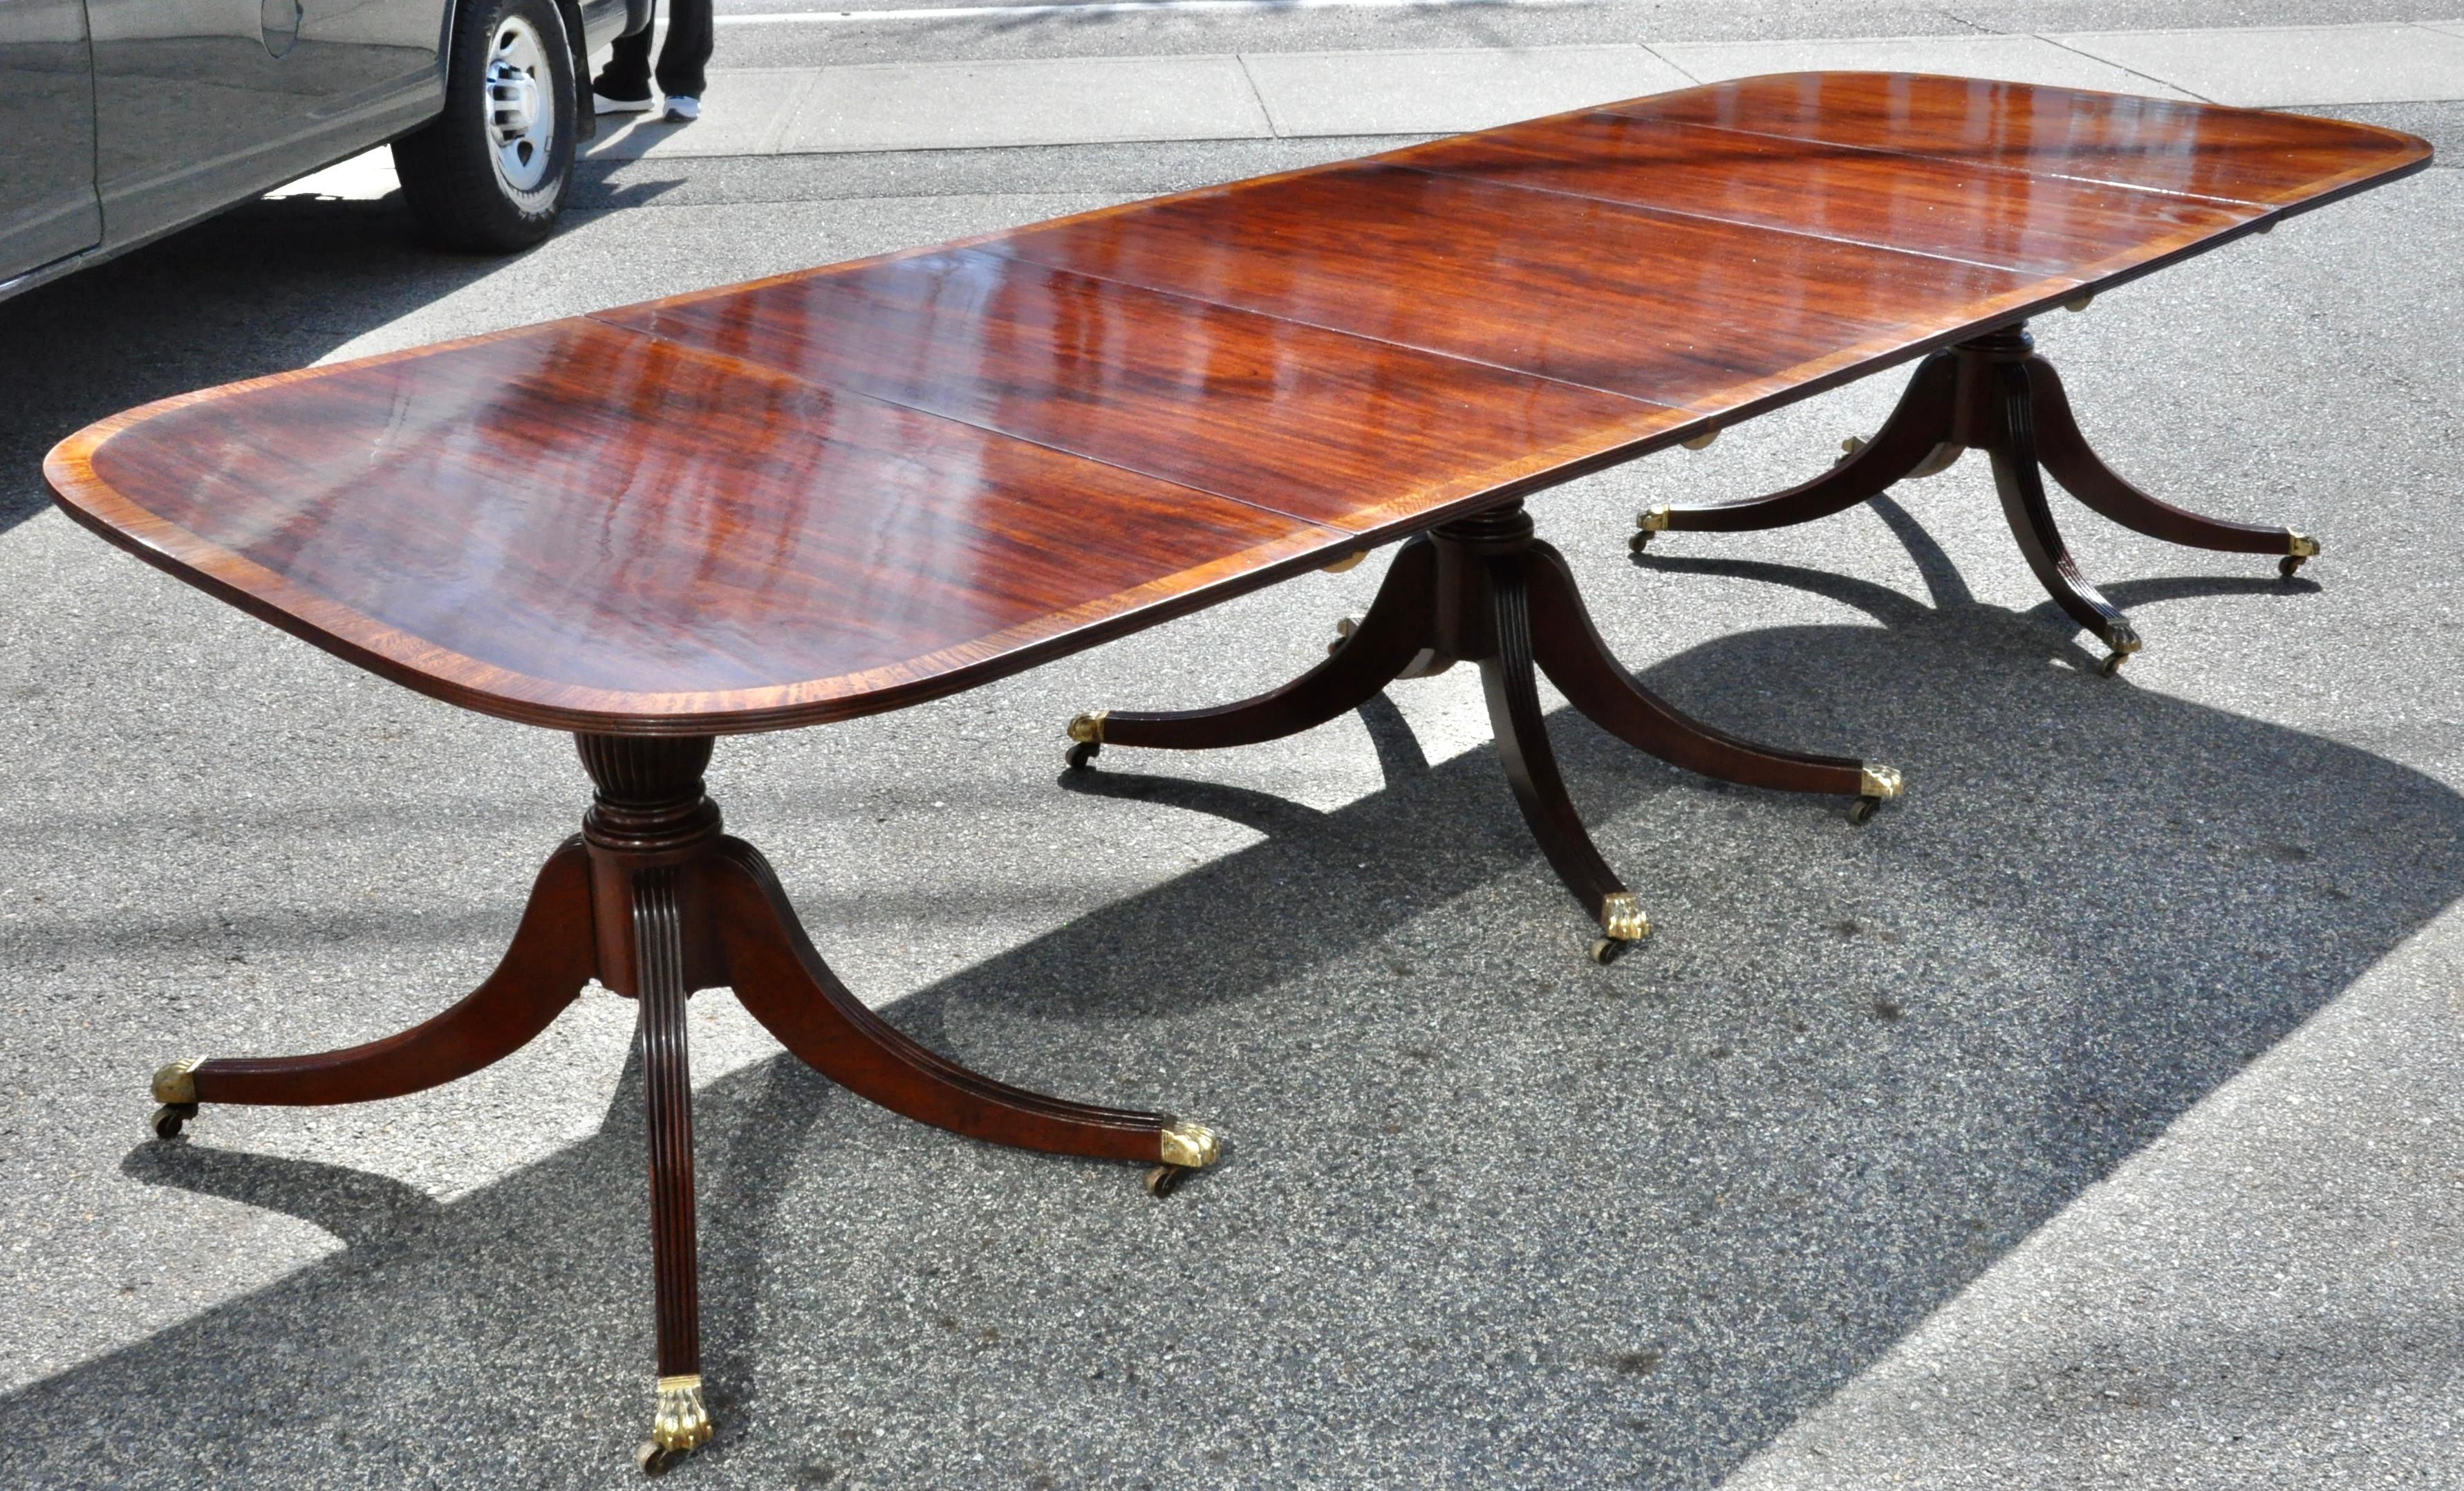 Turn of the century Regency style solid mahogany dining table with satinwood banding. Three sections with two original additional leaves. Very supportive reeded splay leg pedestals. Wonderful figuring and color.

Measures: Fully extended 138